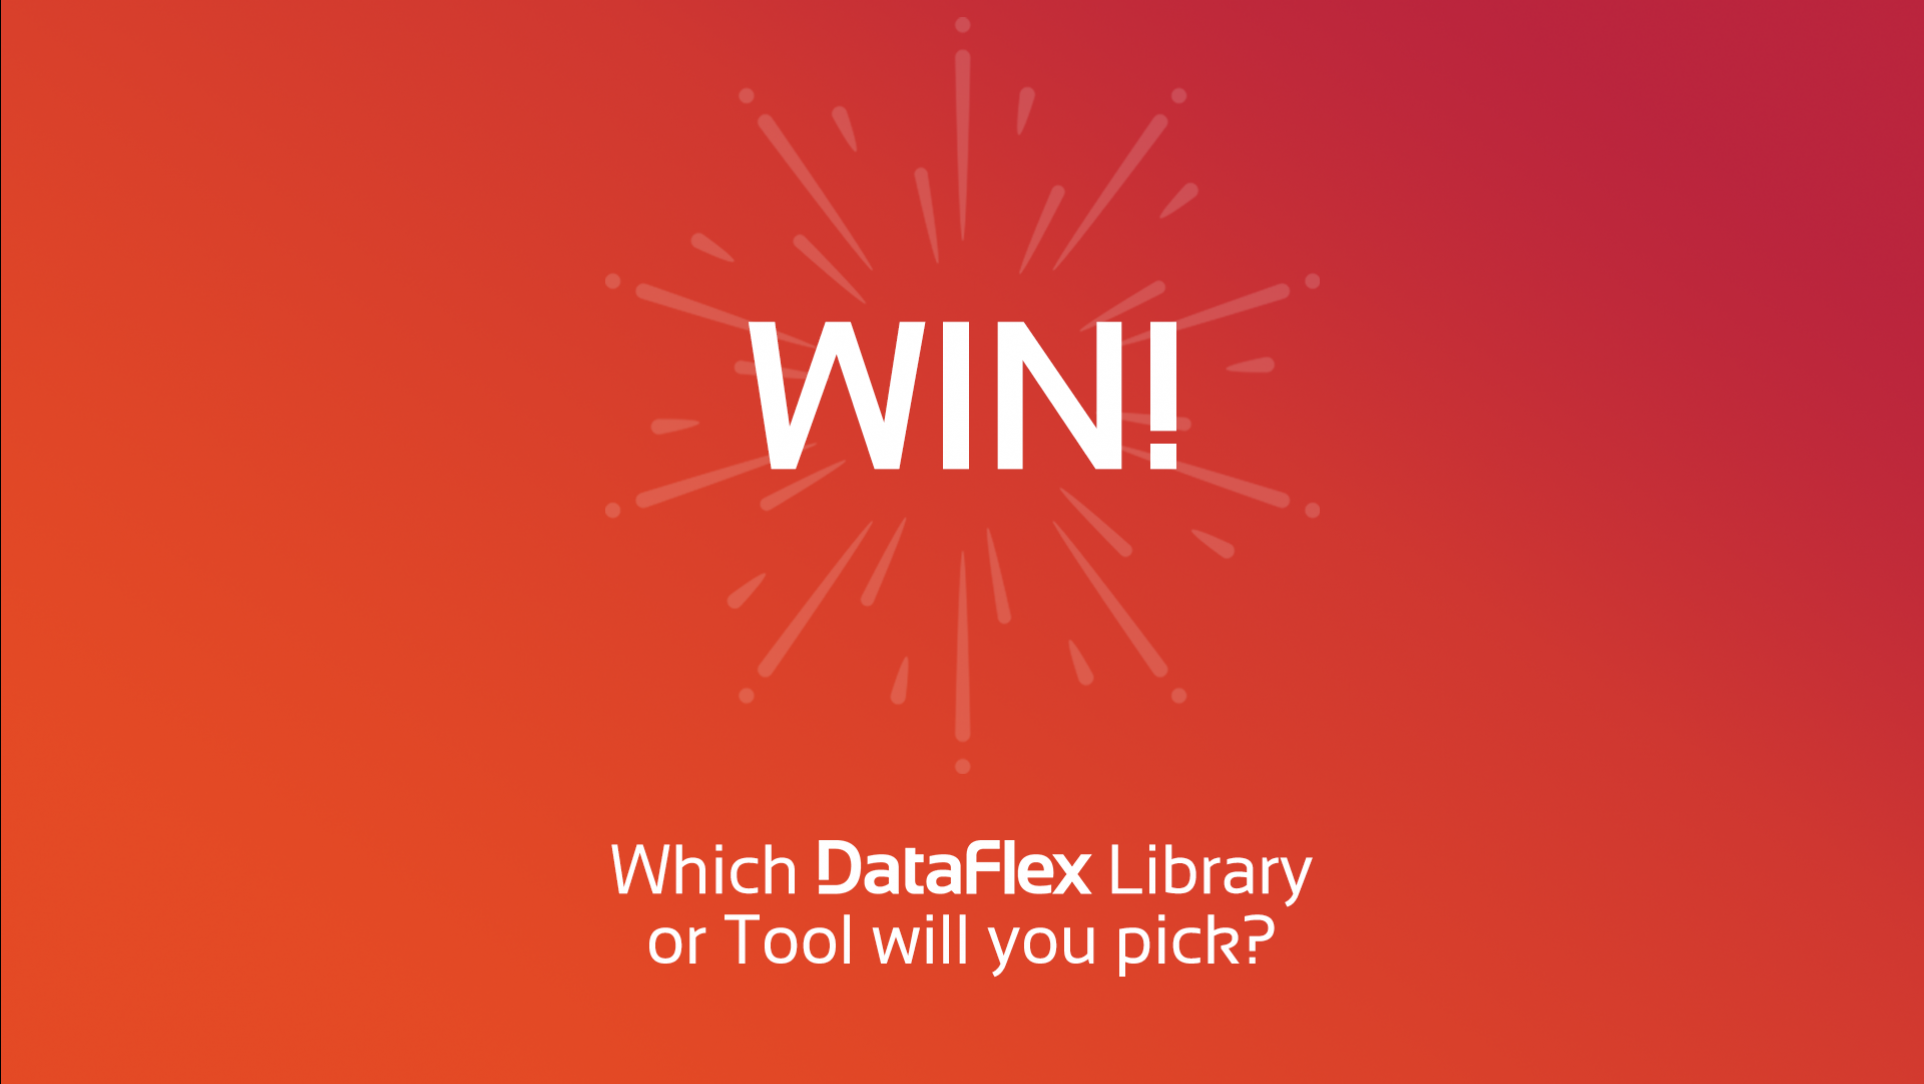 Win spending money for Tools and/or Libraries at Data Access!